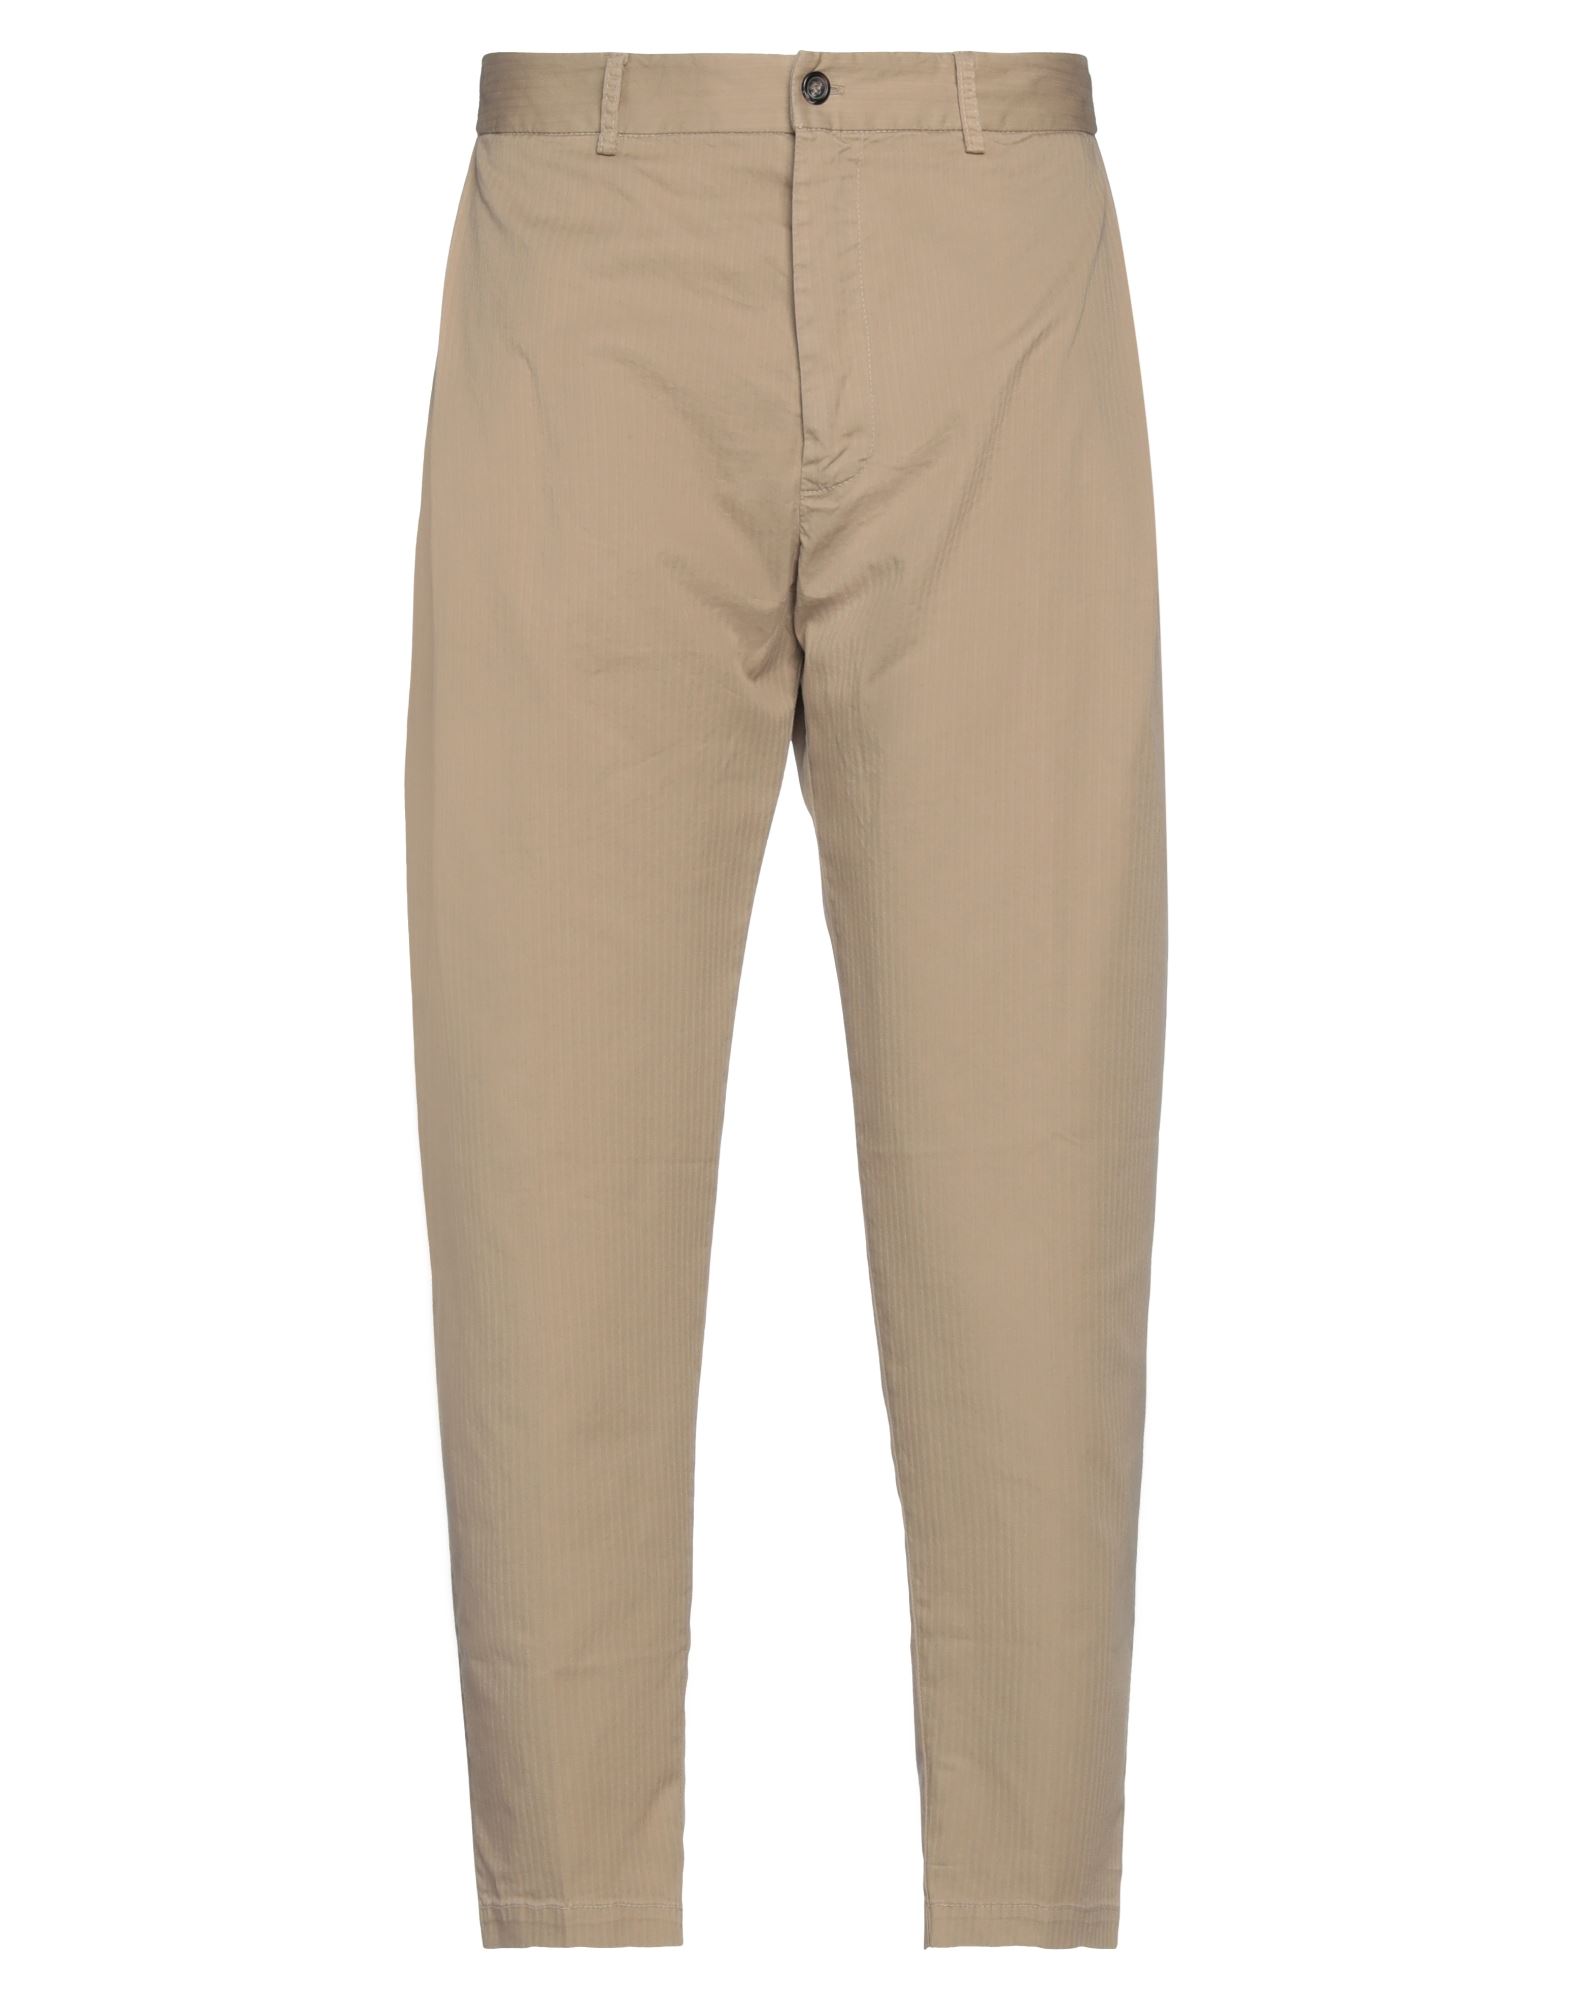 Beaucoup .., Man Pants Sand Size 36 Cotton, Elastane In Beige